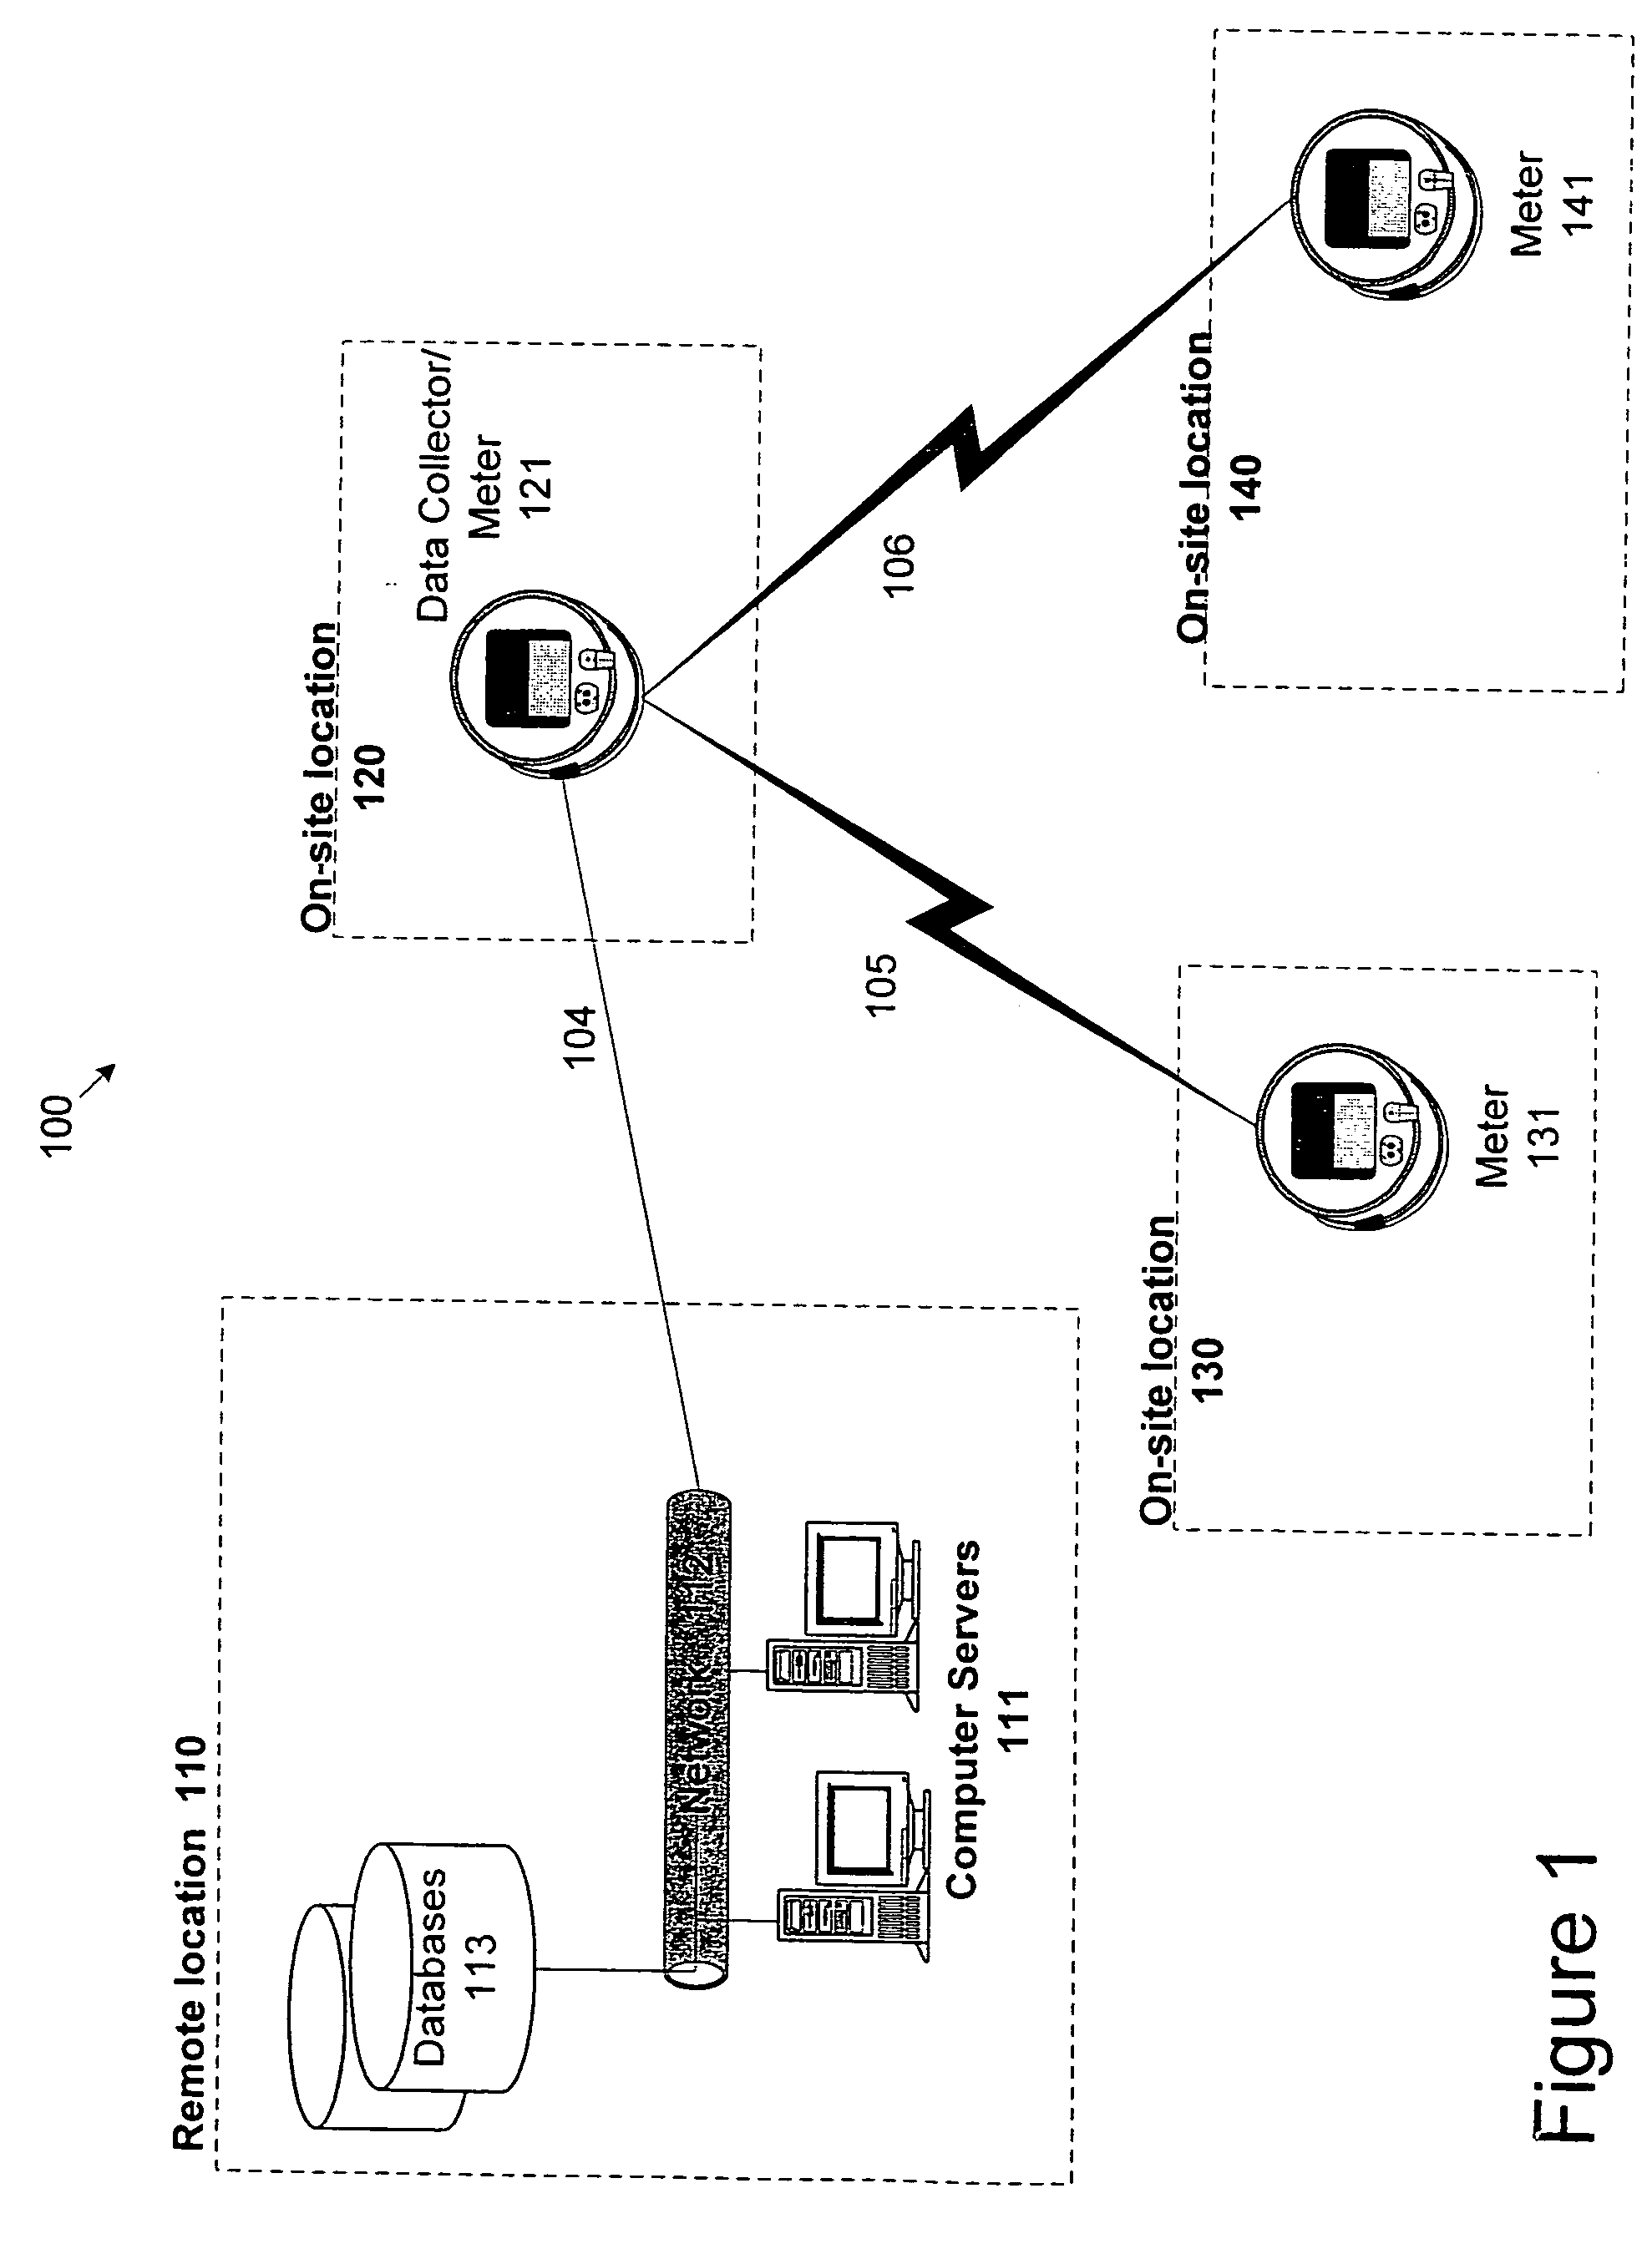 Data collector for an automated meter reading system